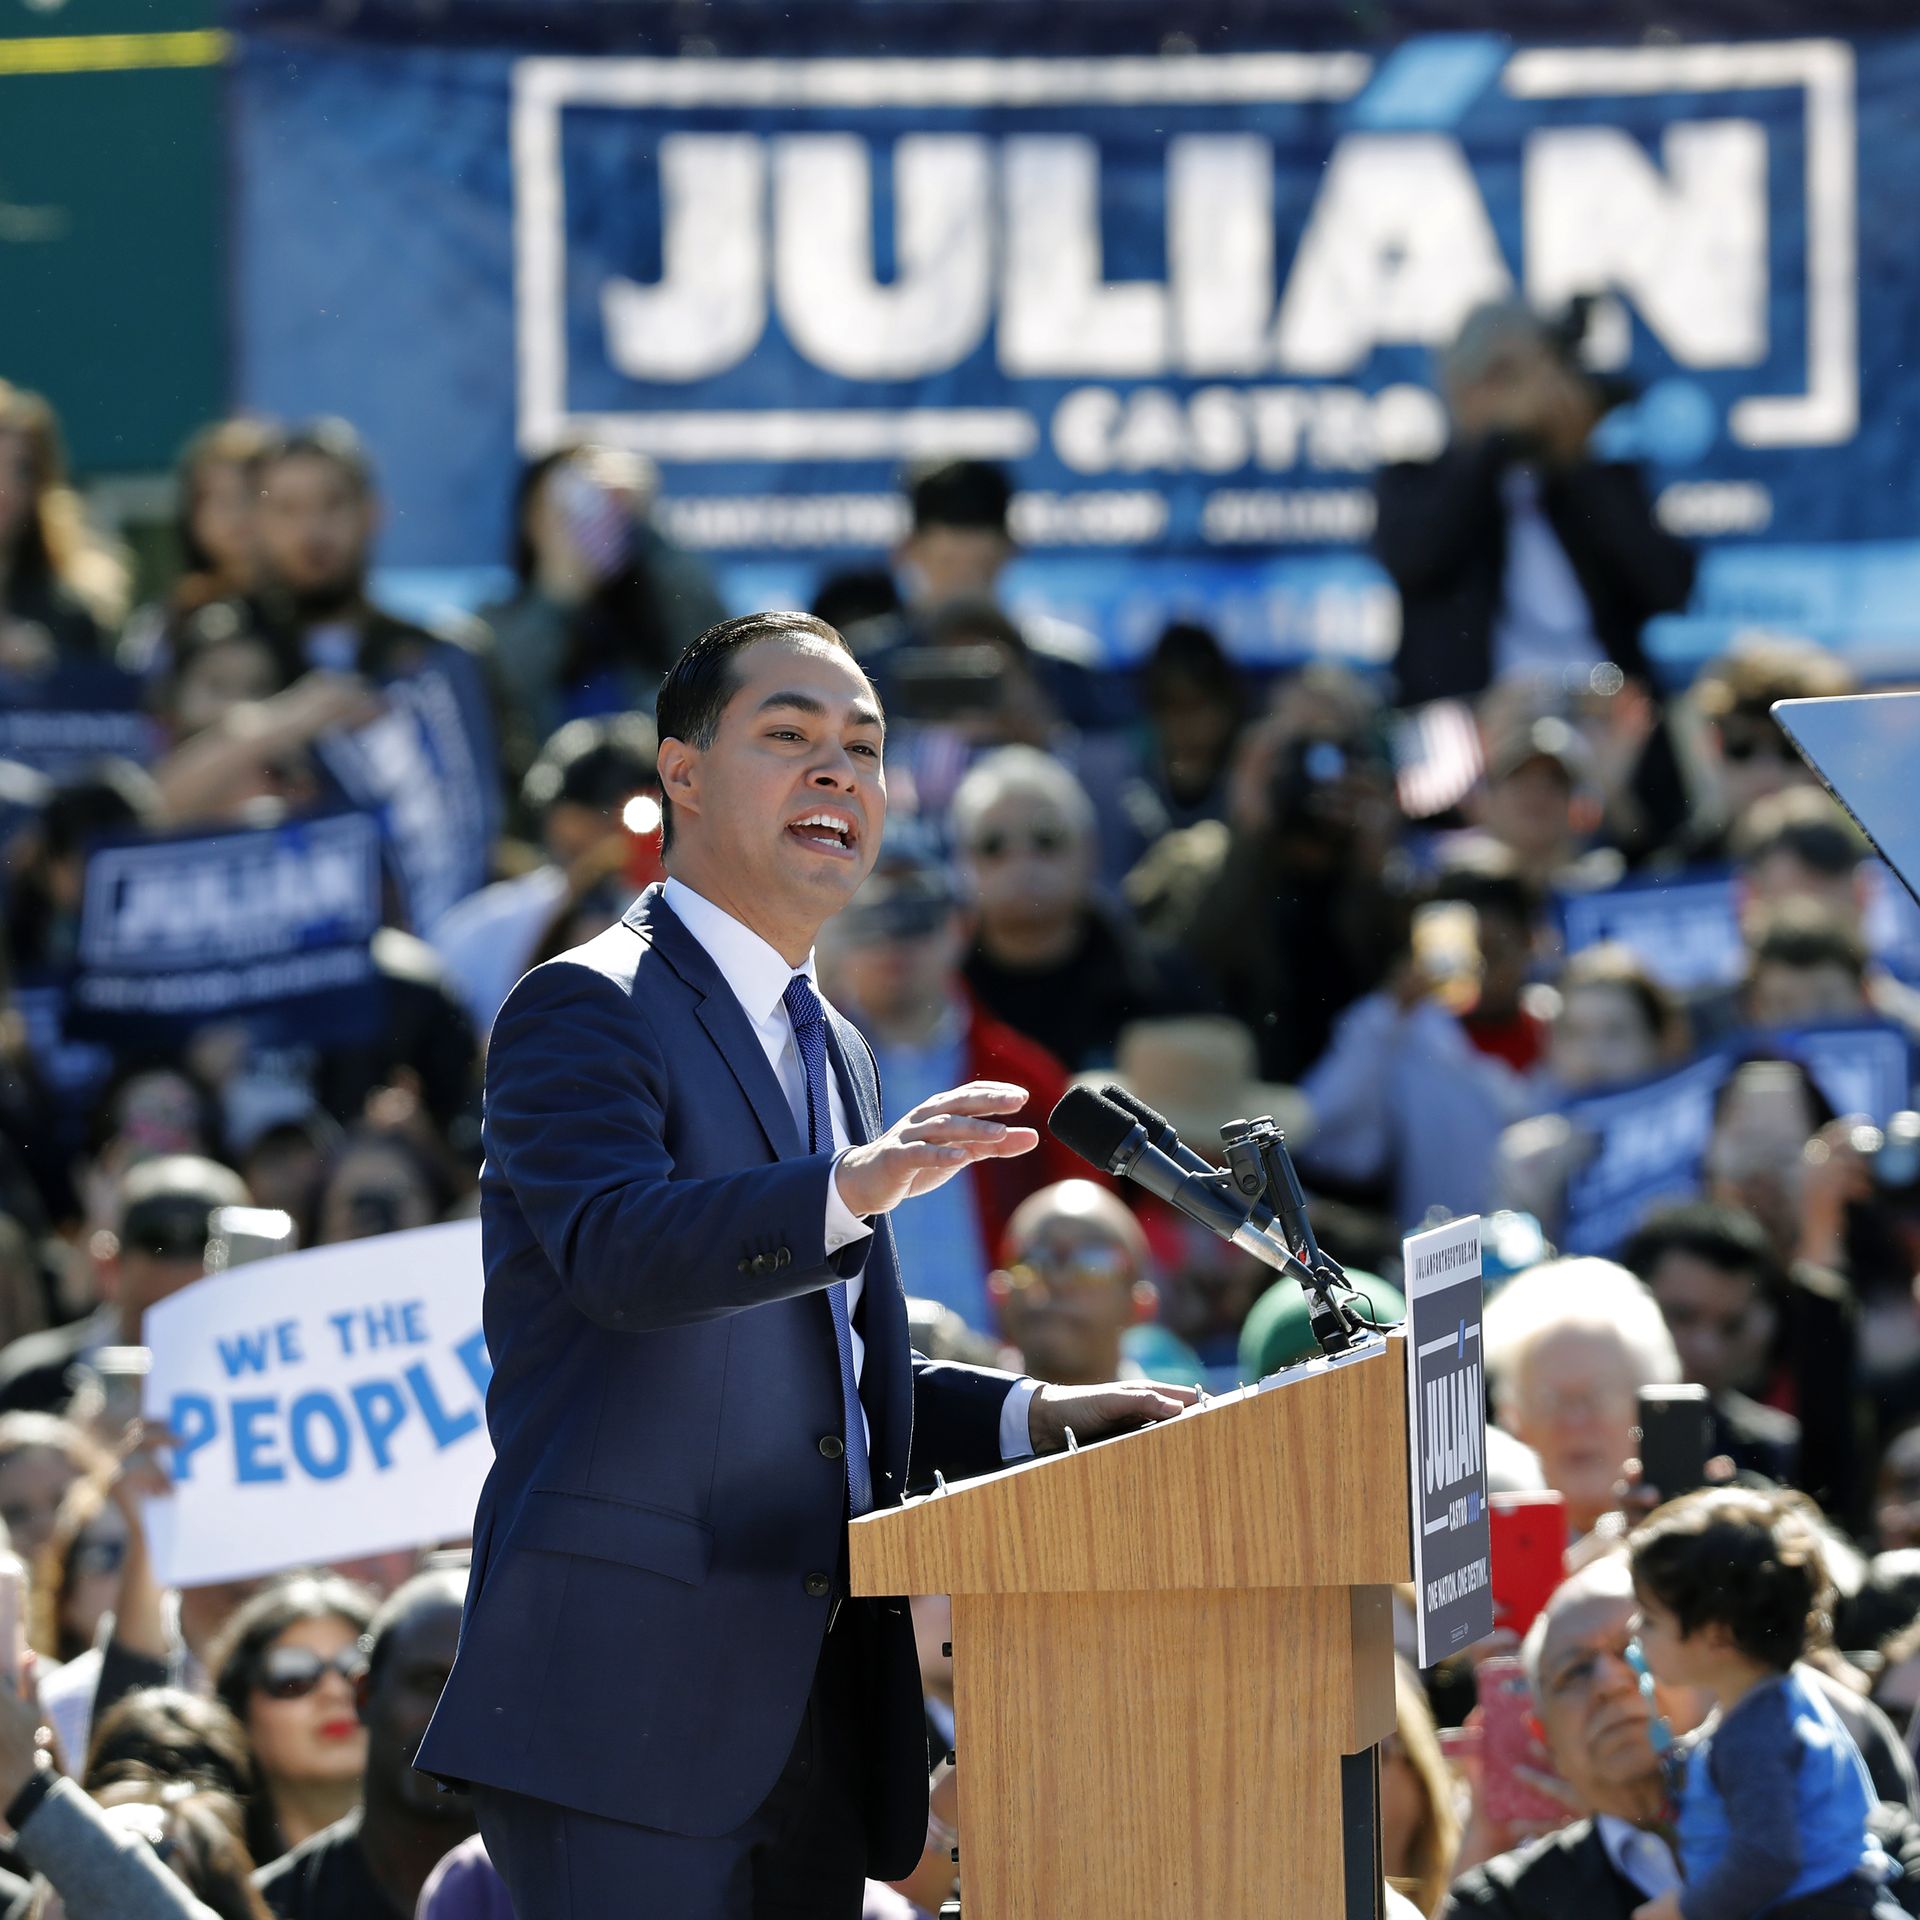 Julián Castro speaks from behind a podium at a campaign event